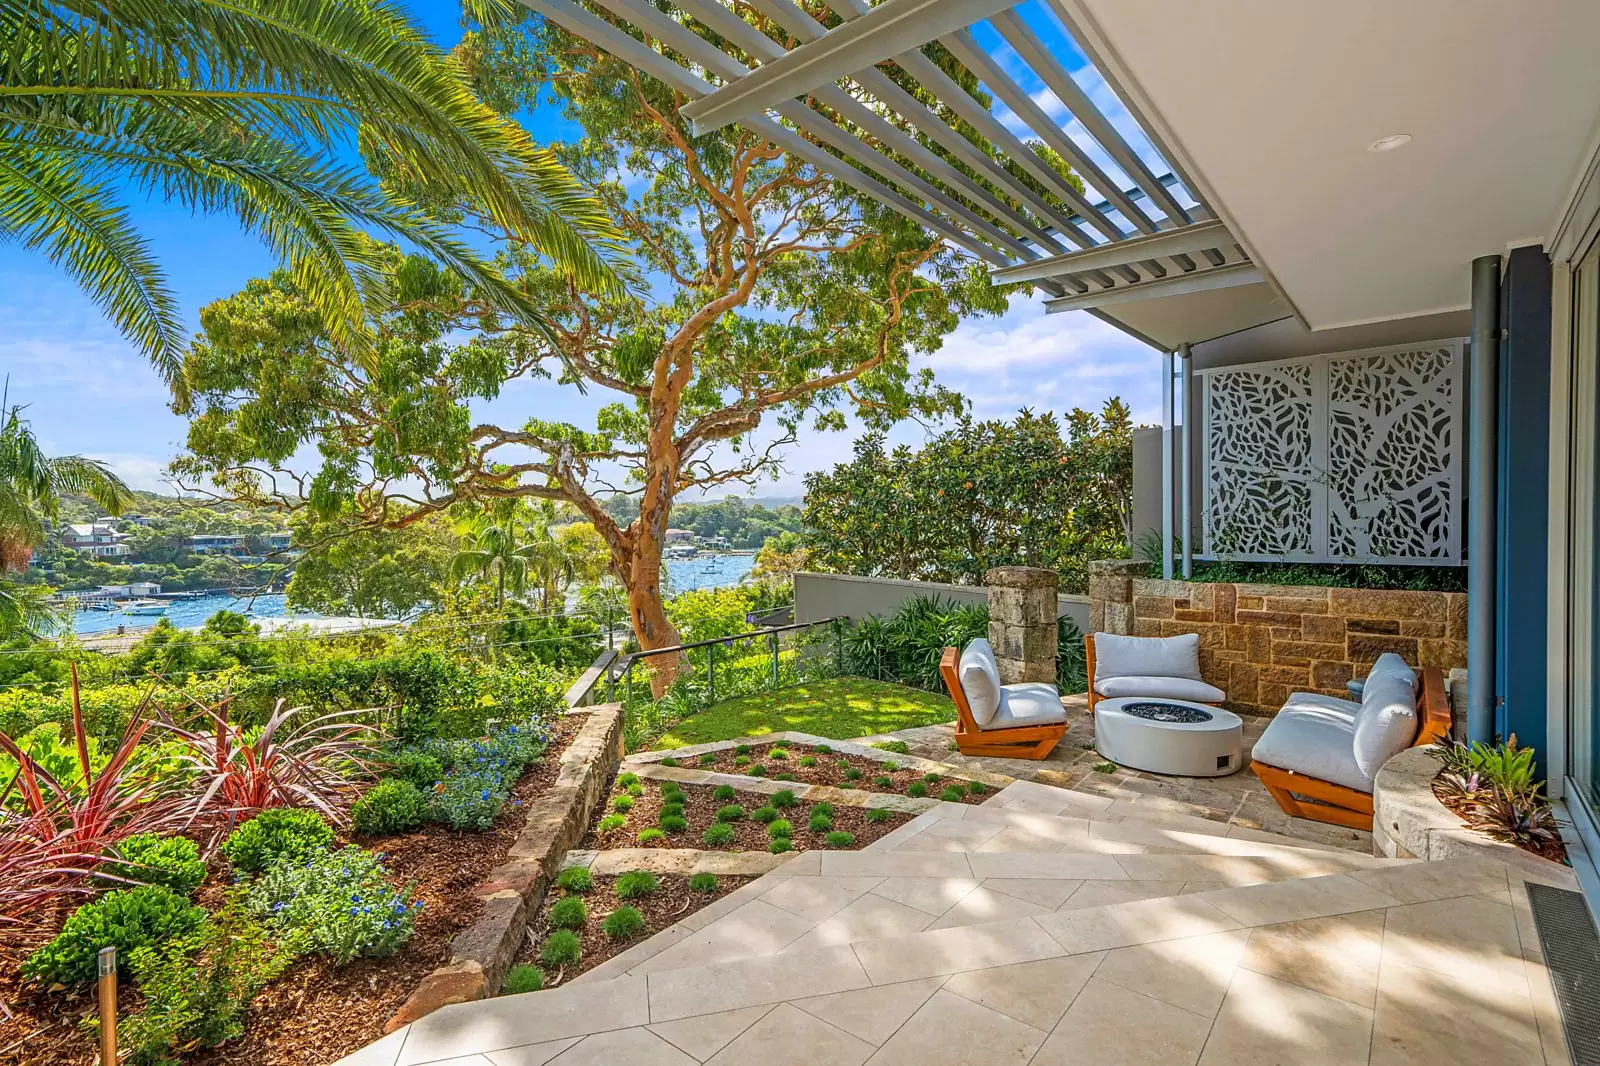 Photo #20: 97 Wentworth Road, Vaucluse - For Sale by Sydney Sotheby's International Realty